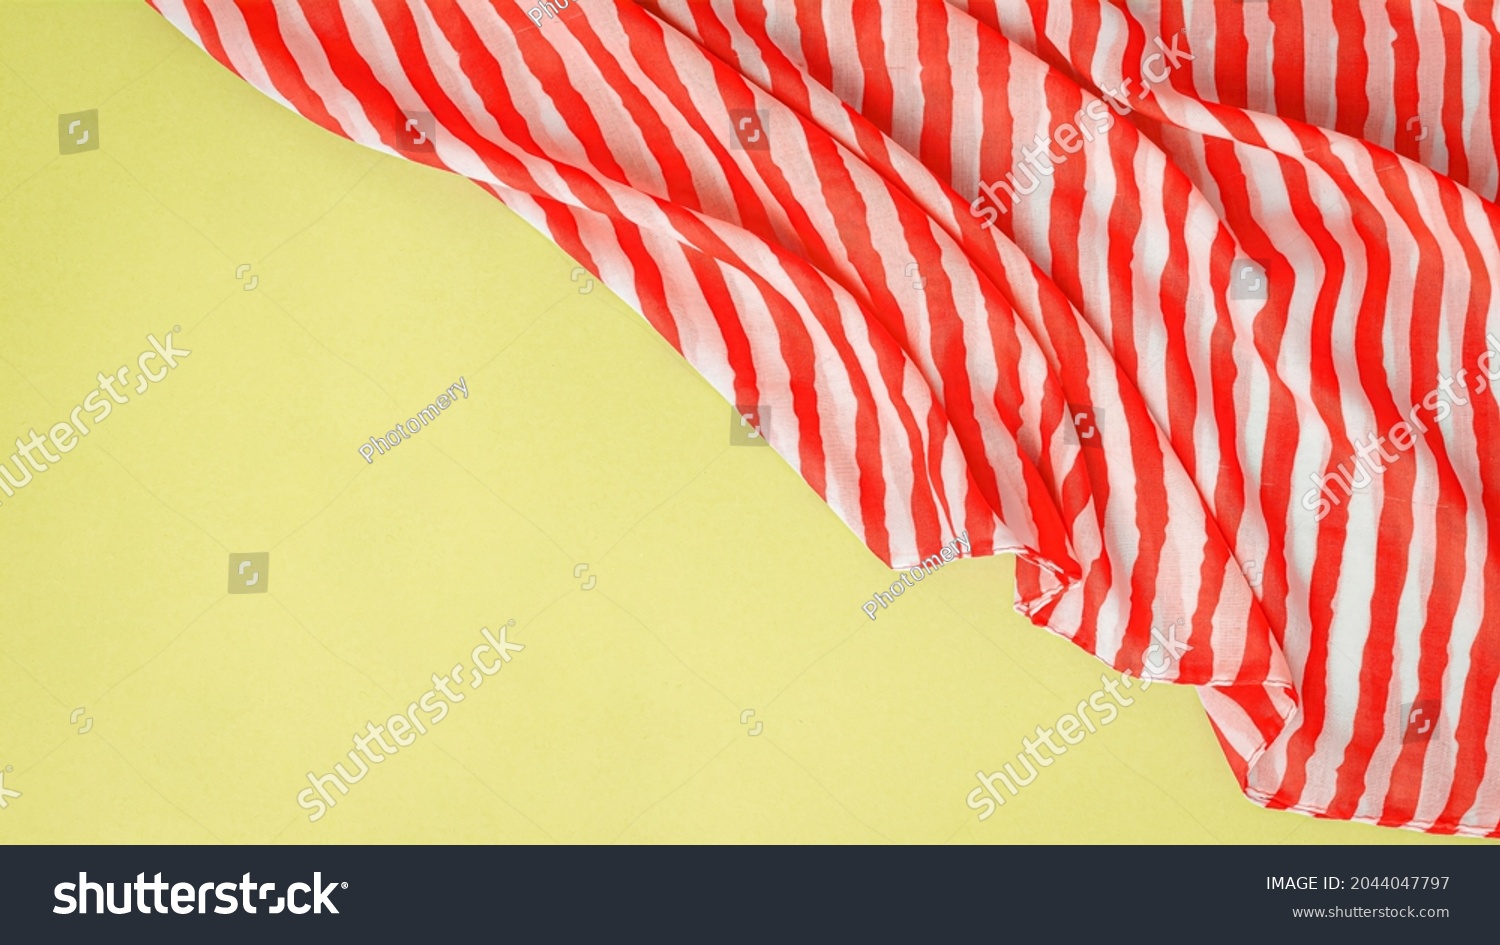 Red striped fabric is wavy thin cloth that having relatively long many band of distinctive color on it. #2044047797